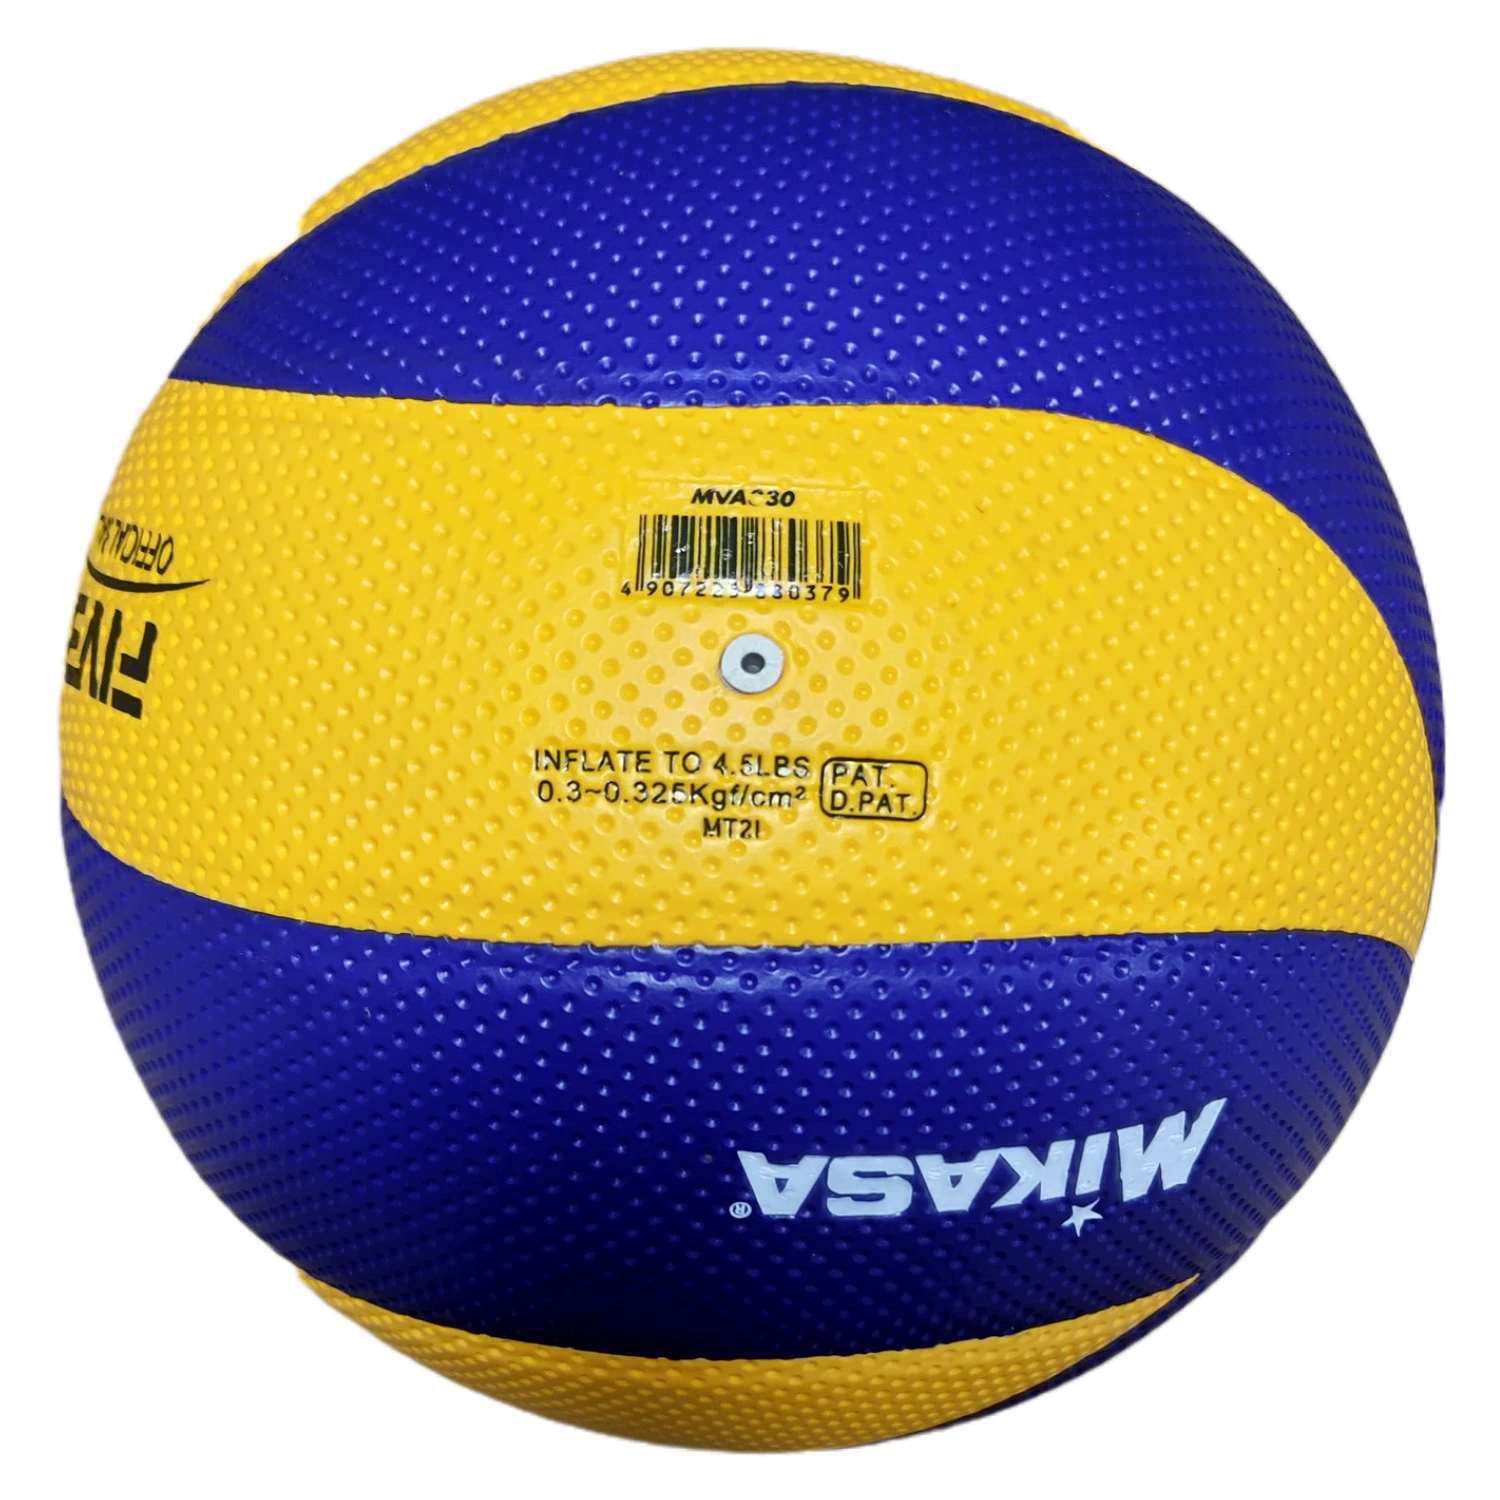 

RTS volleyball factory direct selling Mi kasa mva330 high quality professional competition youth training volleyball, Customize color